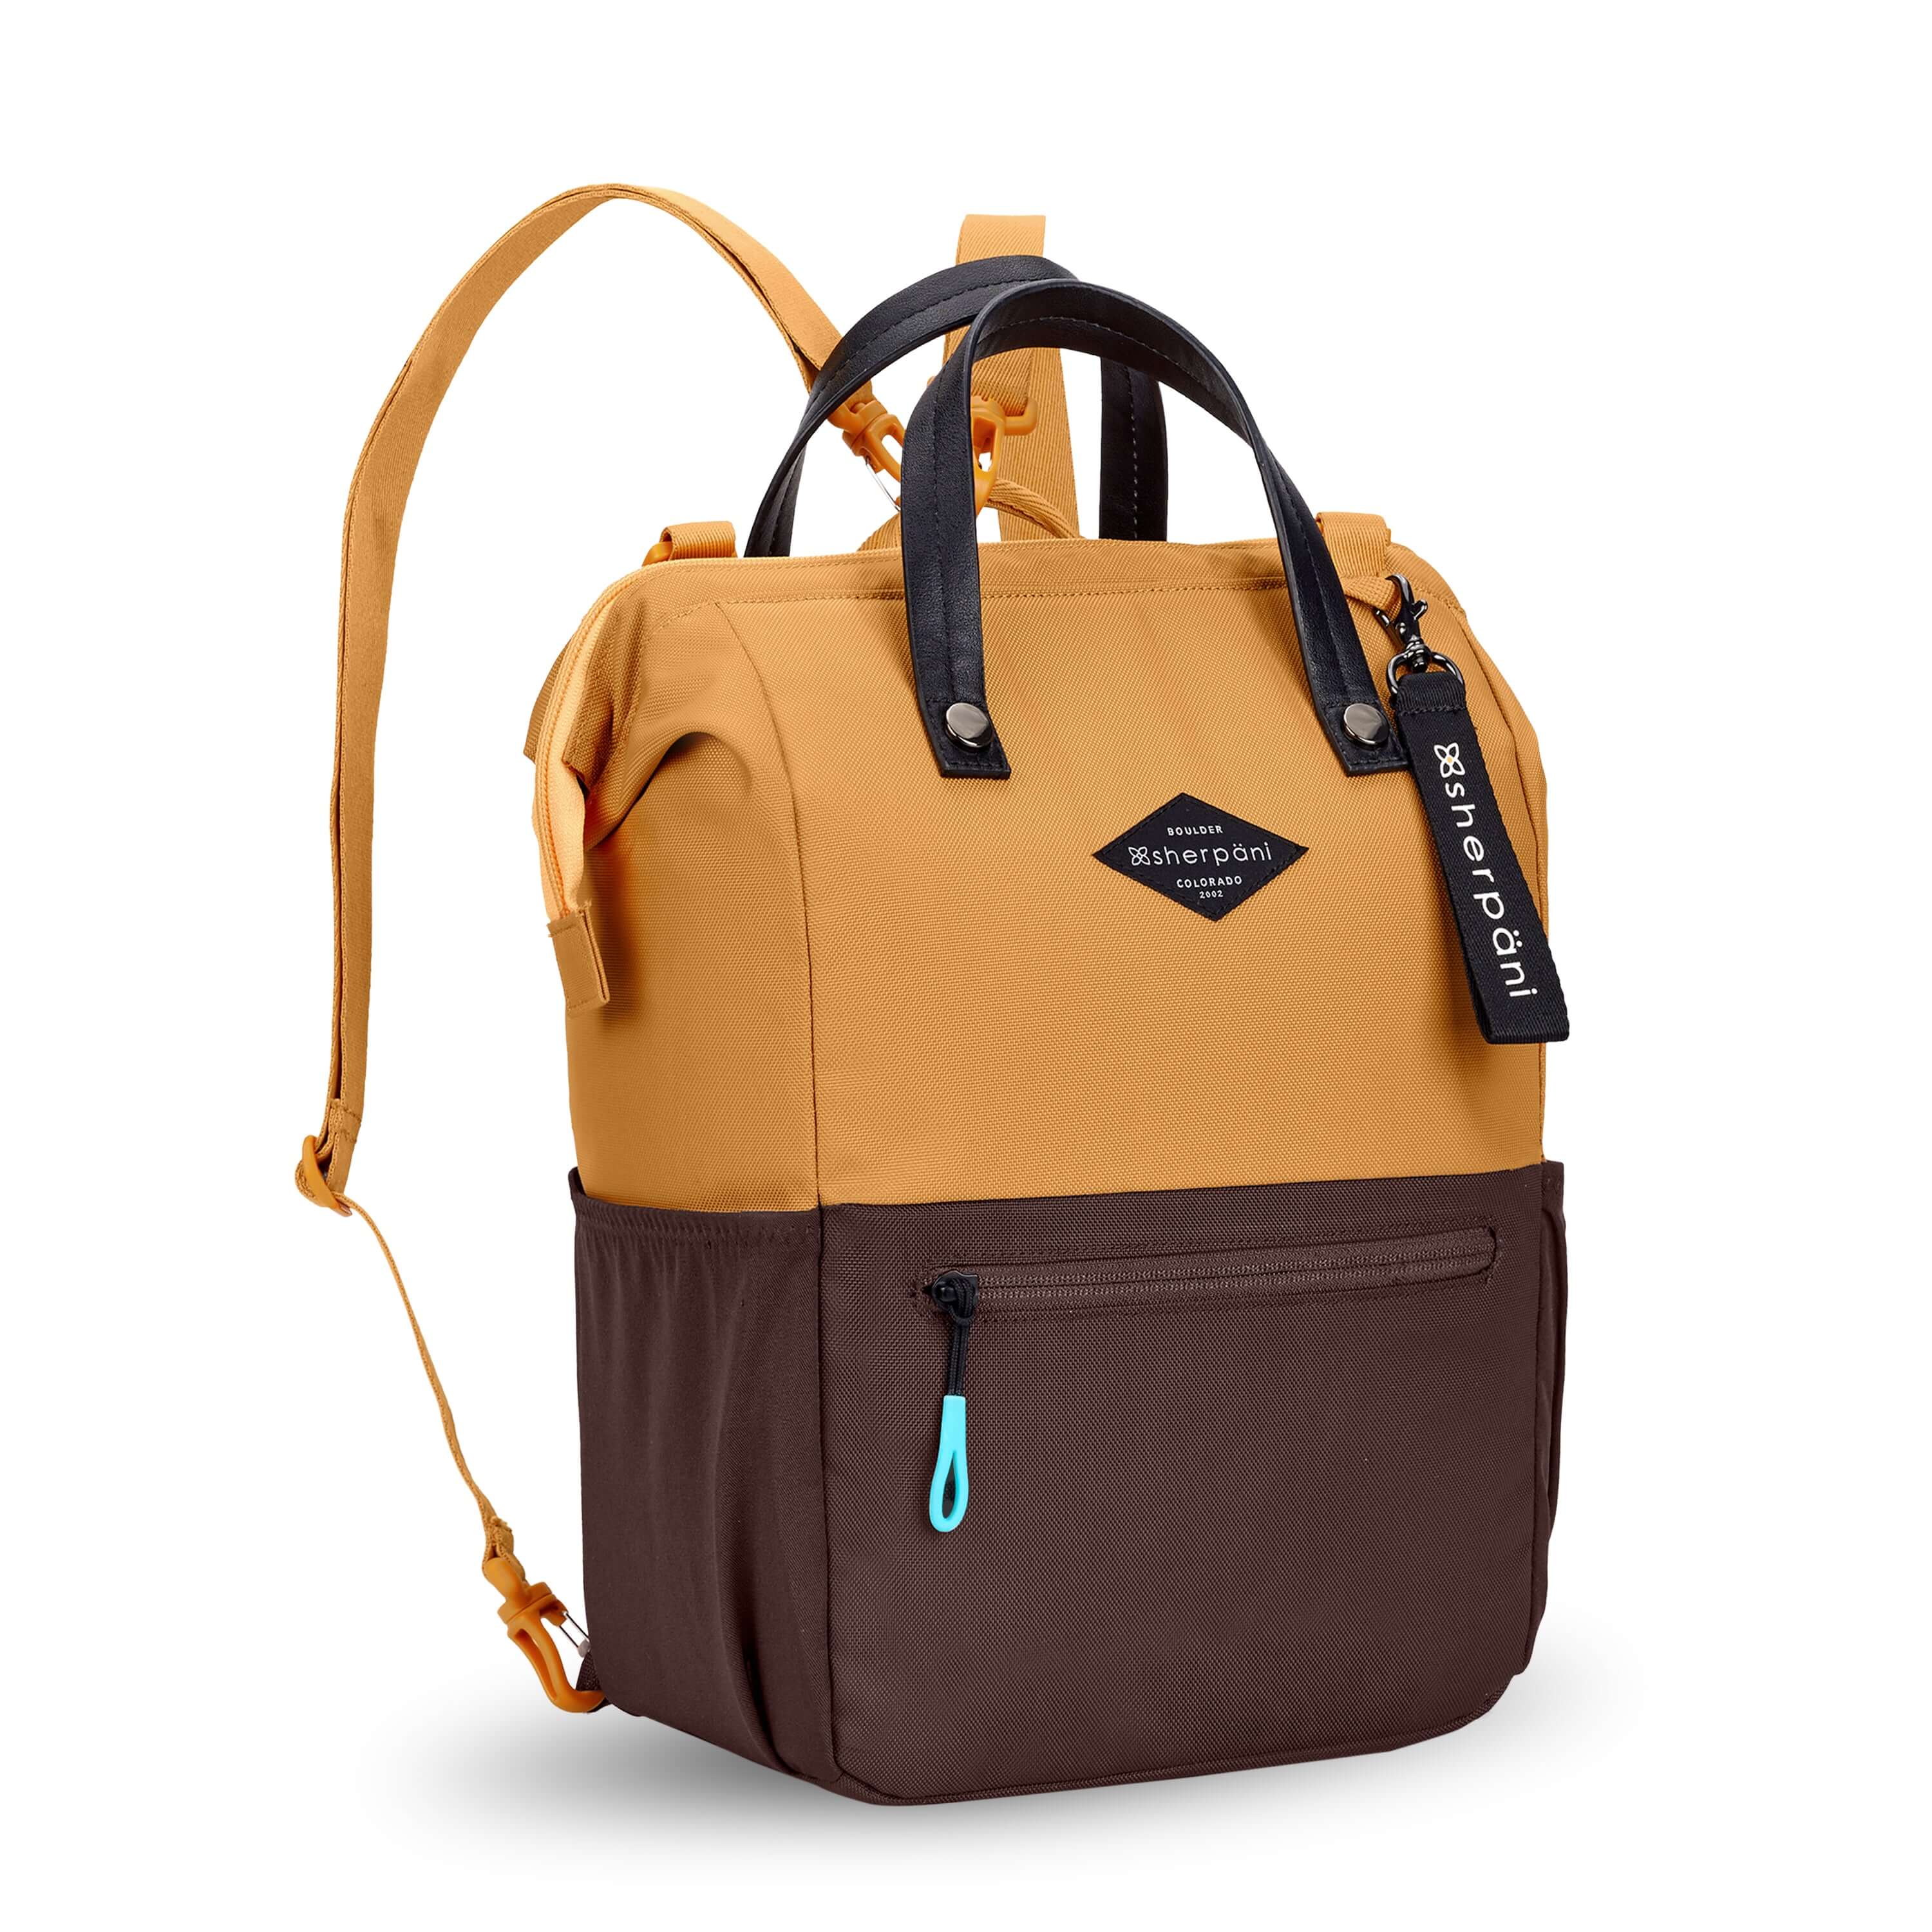 Angled front view of Sherpani three-in-one bag, the Dispatch in Sundial. The bag is two-toned: the top is burnt yellow and the bottom is brown. There is an external zipper pocket on the front panel. Easy-pull zippers are accented in aqua. A branded Sherpani keychain is clipped to the upper right corner. Elastic water bottle holders sit on either side of the bag. It has short tote handles and adjustable/detachable straps that can function for a backpack or crossbody. #color_sundial